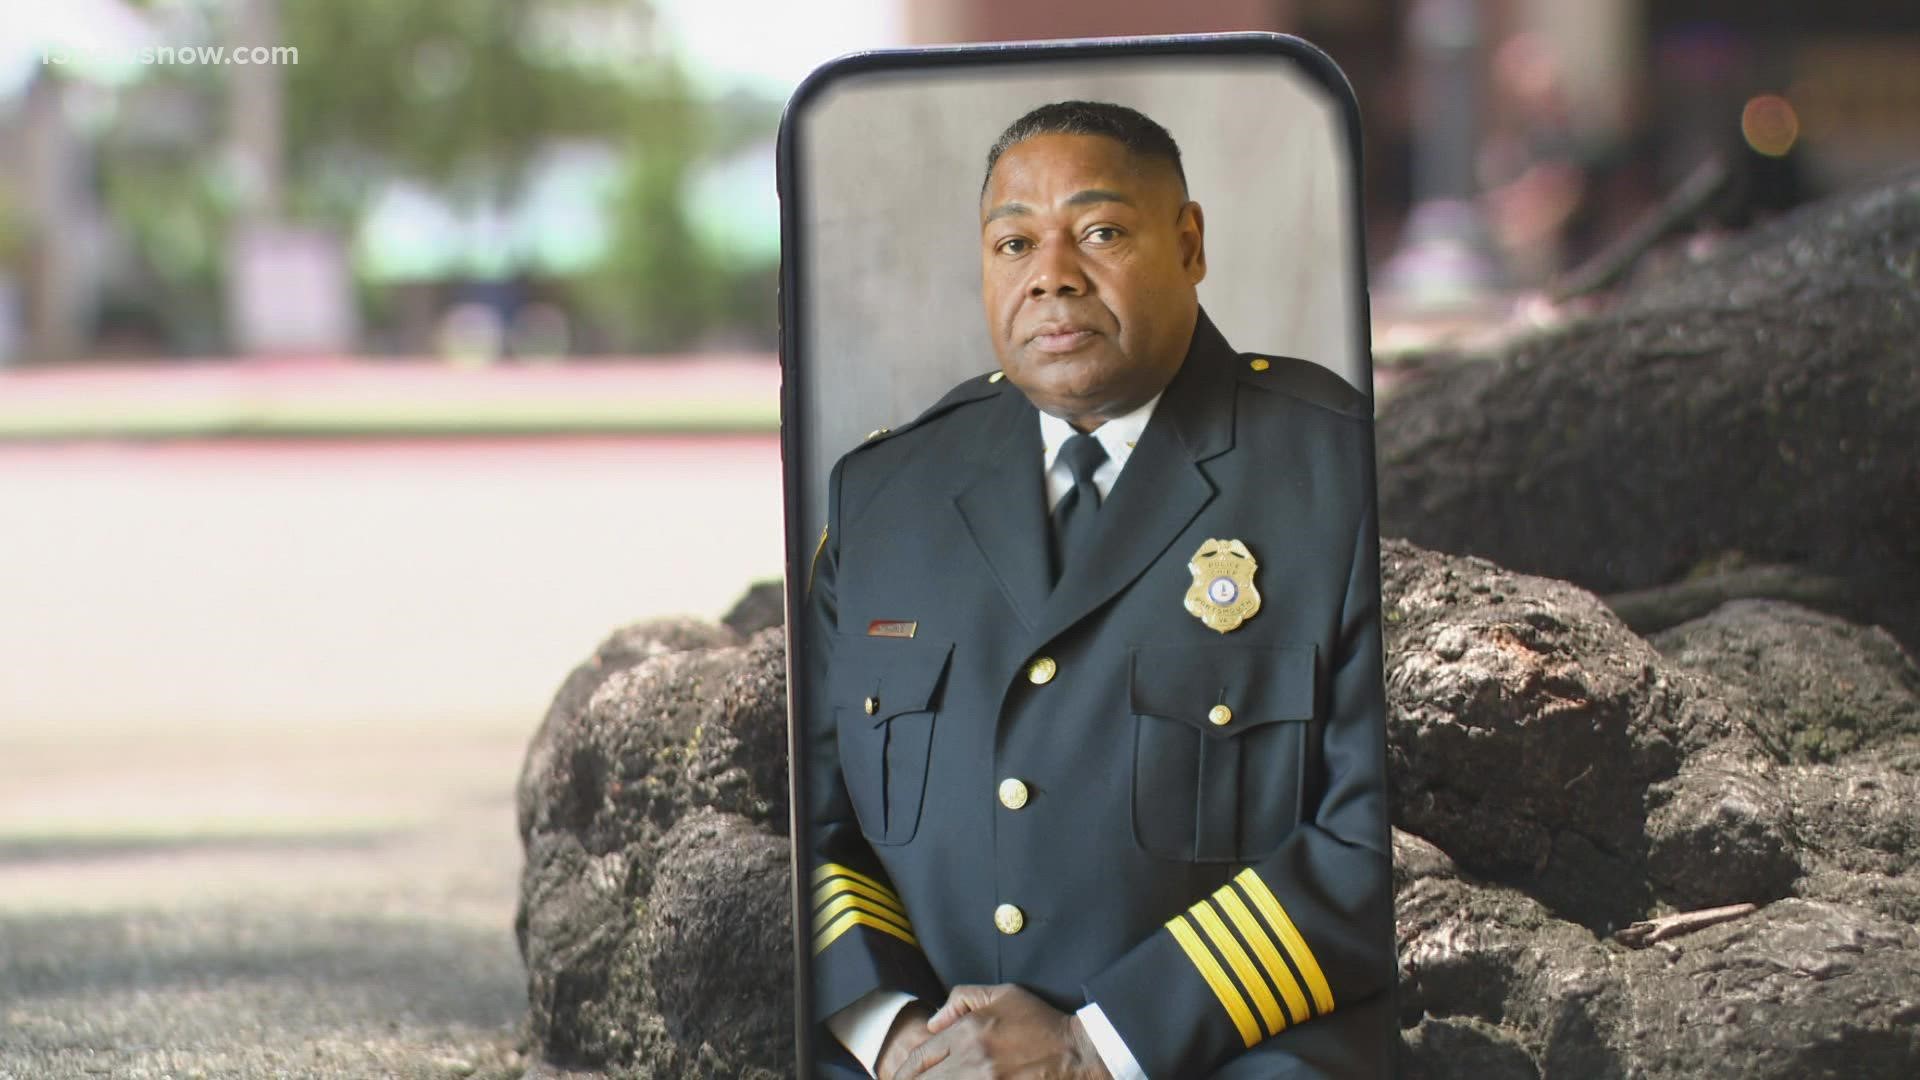 The former chief claims the new city manager fired him over a text message.